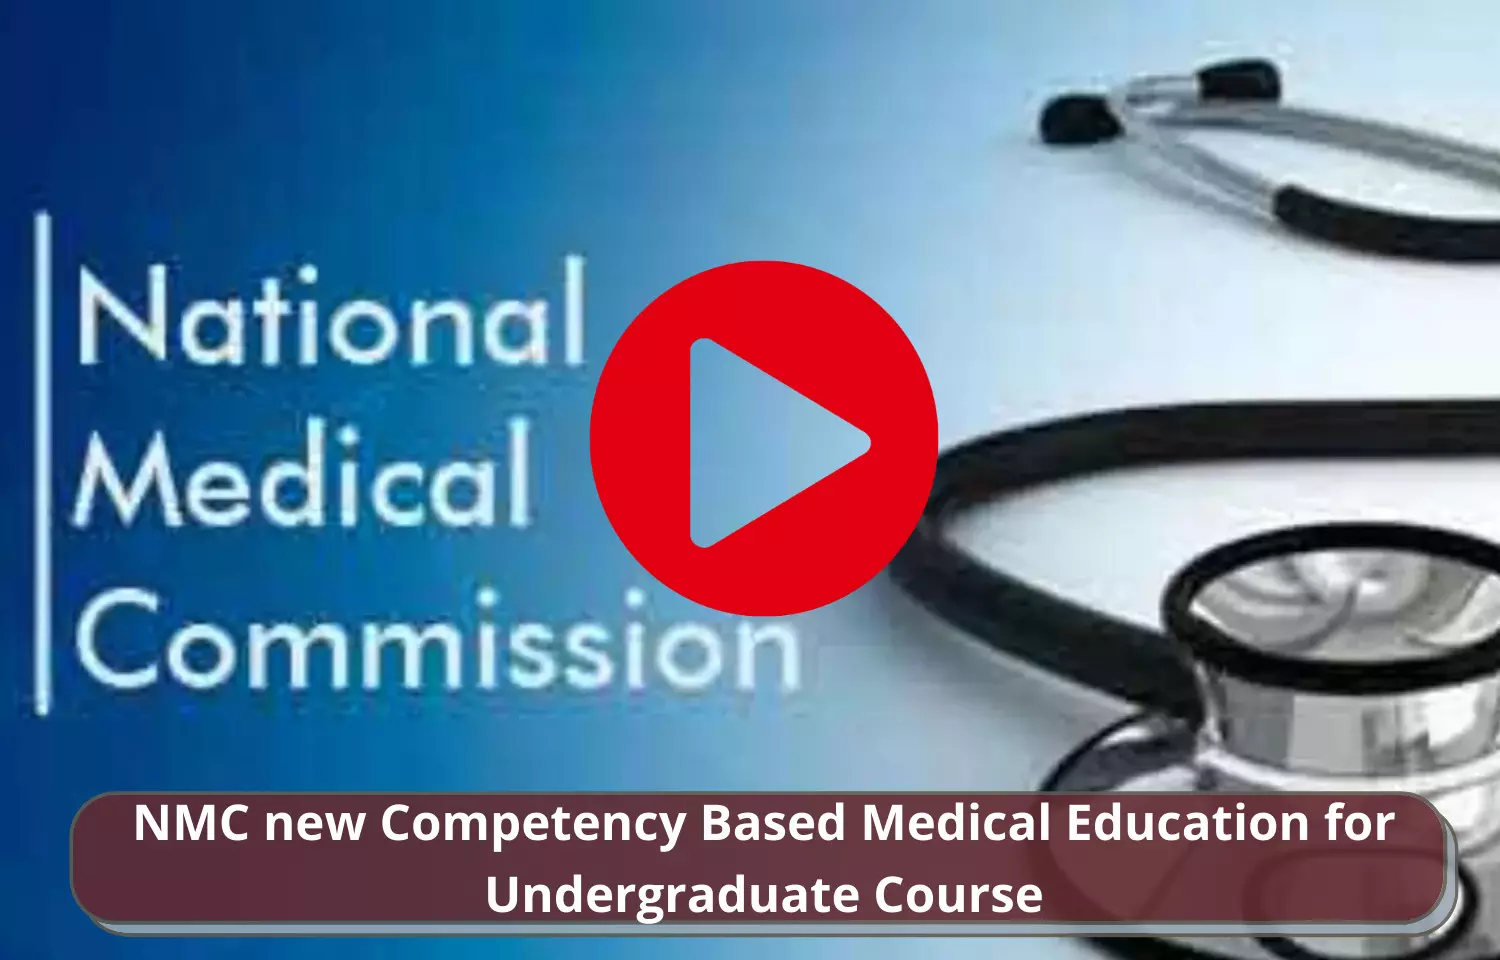 NMC issues new Competency-Based Medical Education curriculum for UG course